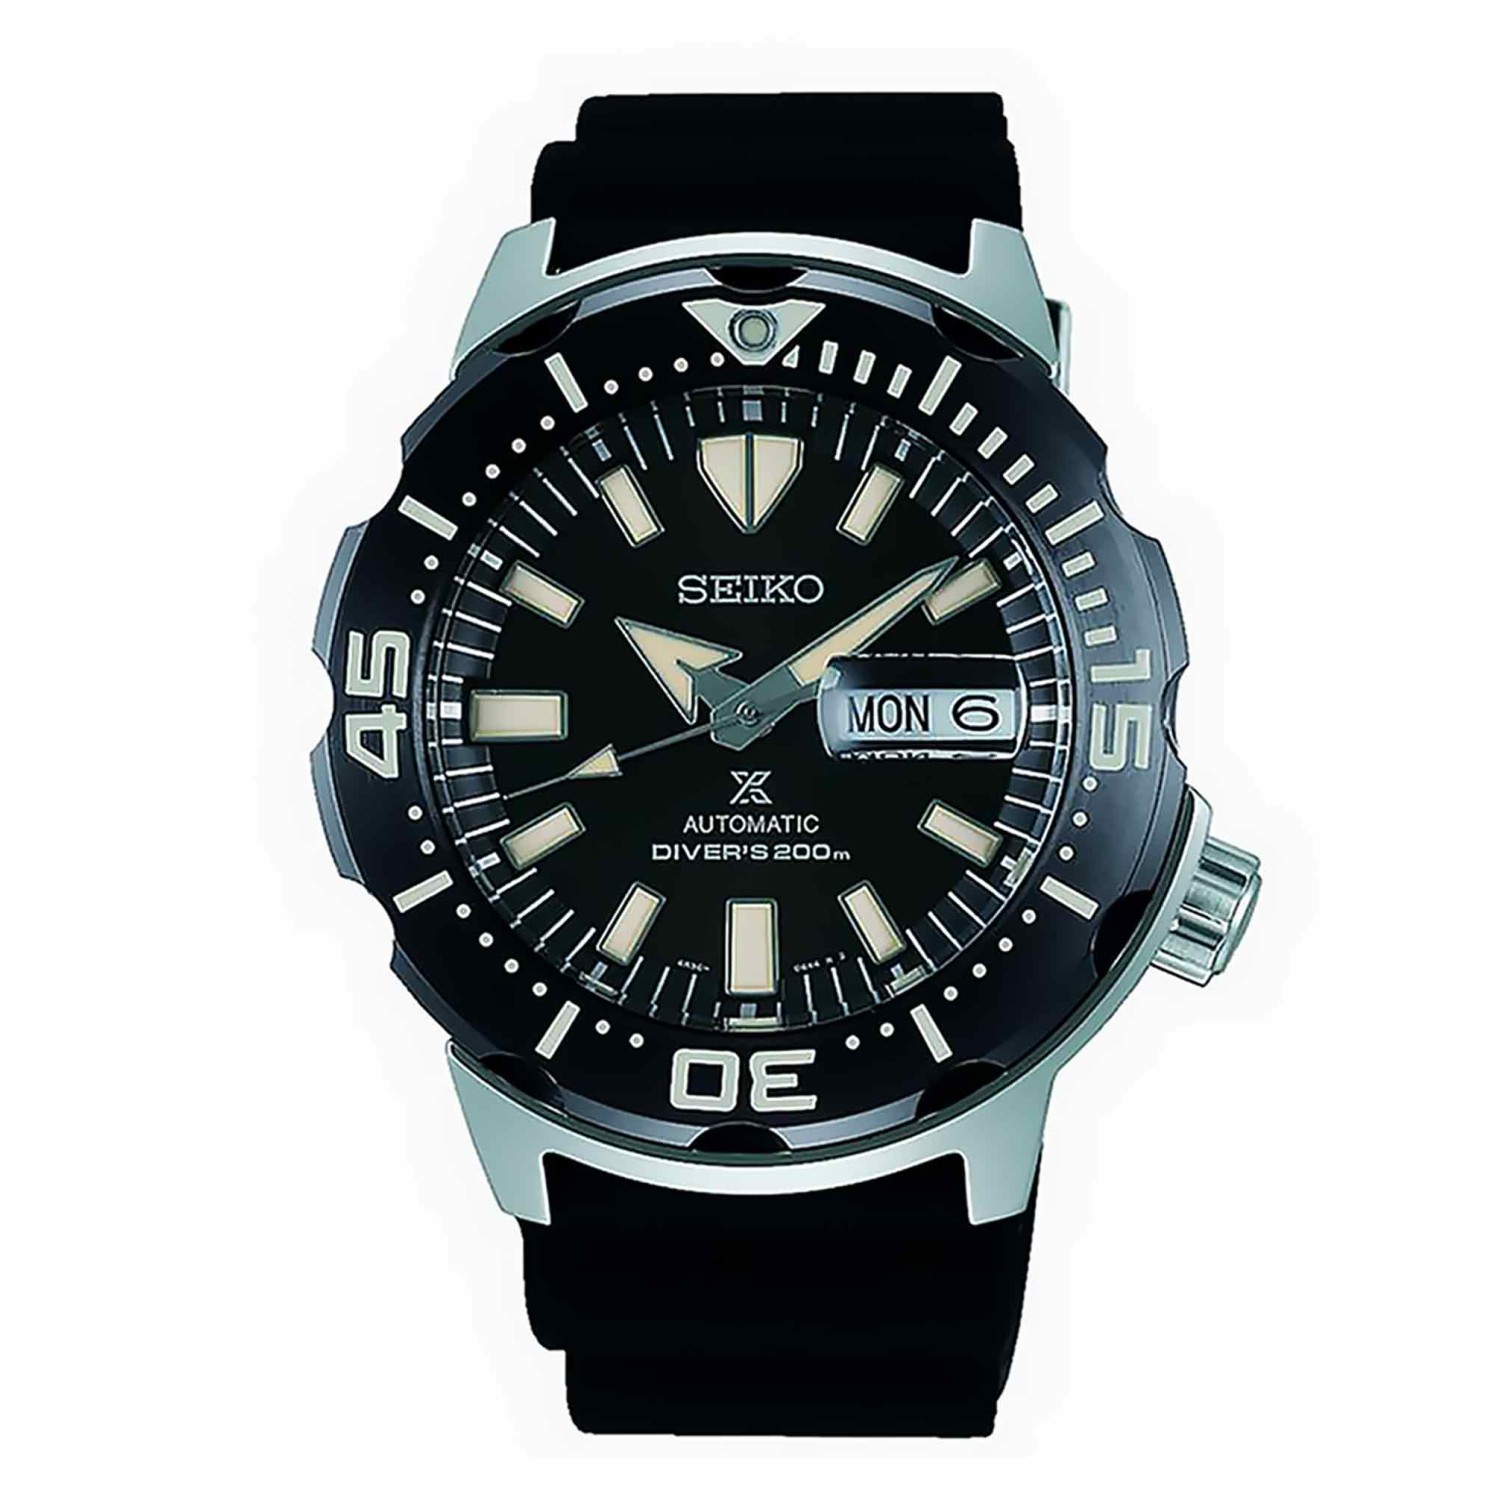 SRPD27K SEIKO Prospex Automatic PROSPEX Monster Divers Watch. The Seiko SRPD27K Dive Watch is available at your Seiko Dive Watch Specialist  - Christies Papatoetoe and Watch Station Manukau3 Months No Payments and Interest for Q Card holders Oxipay is sim